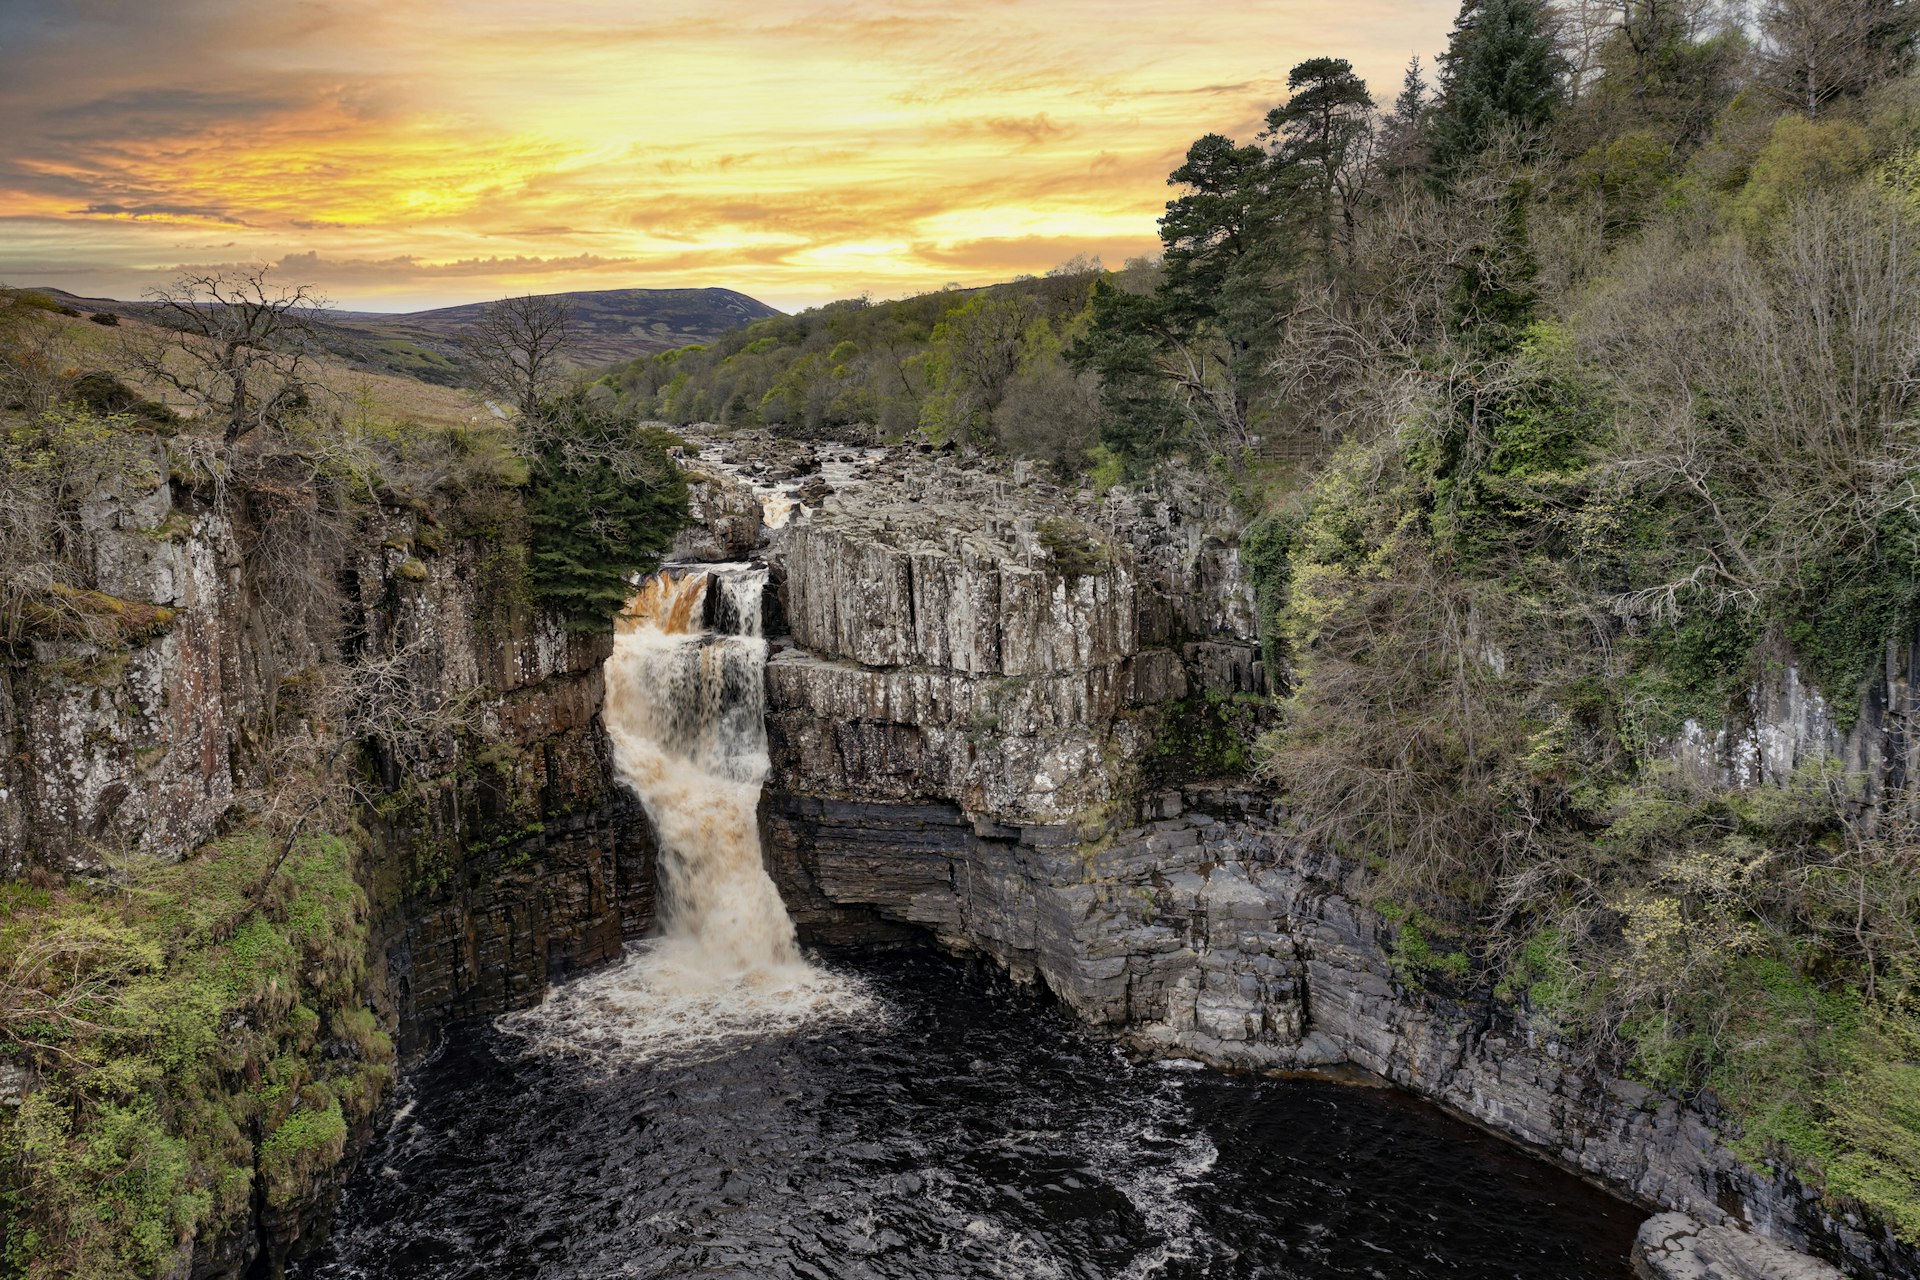 A waterfall backed by an orange sky cascades down a rock face into a pool